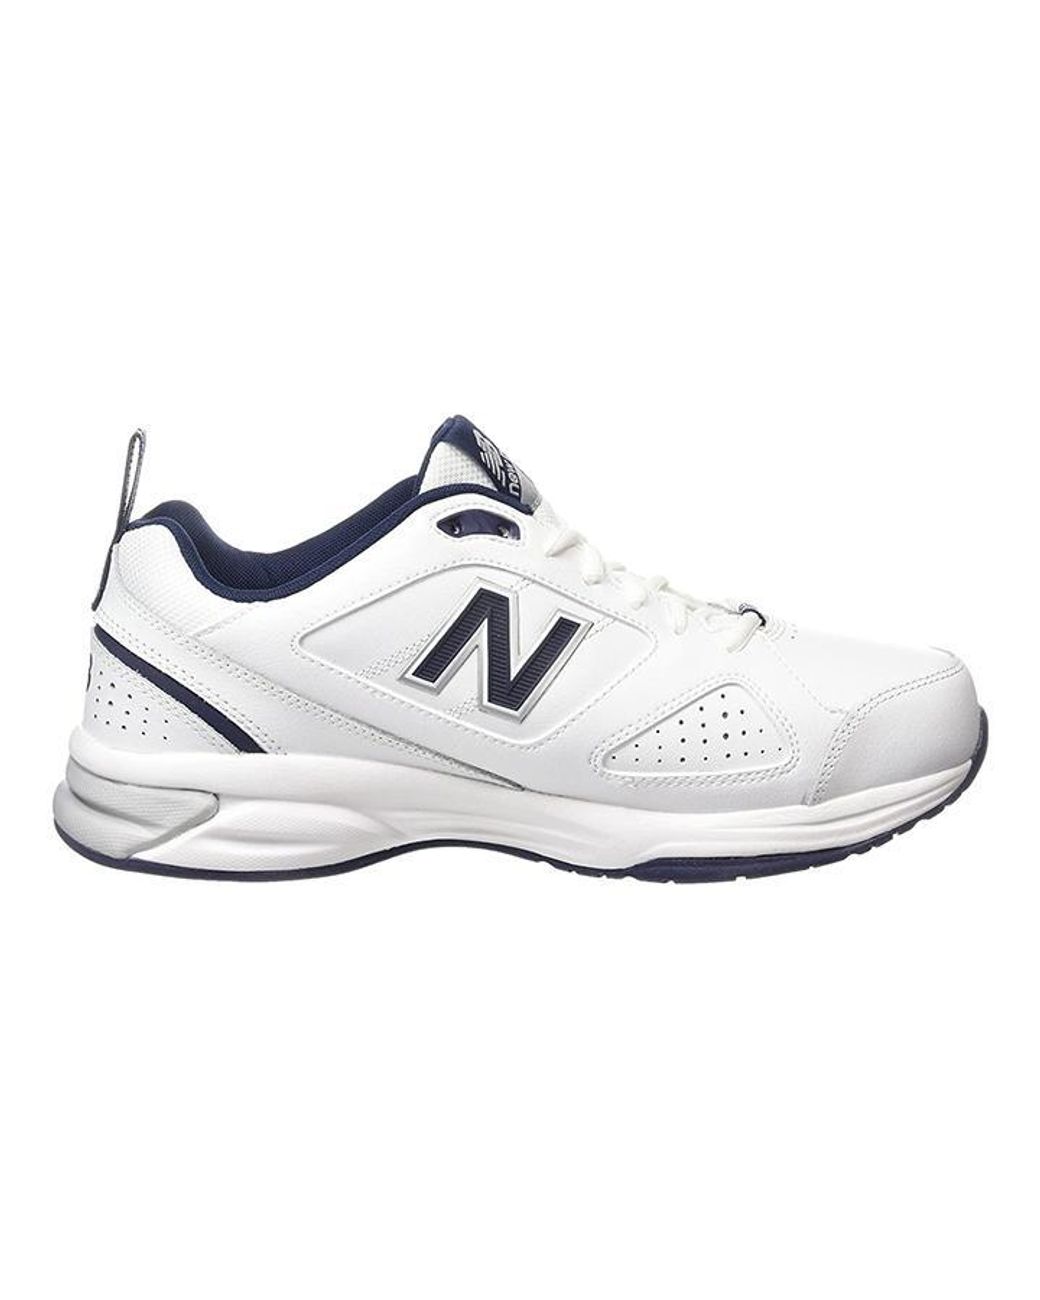 New Balance Rubber S Wide Fit Mx624wn4 Trainers in White - Lyst